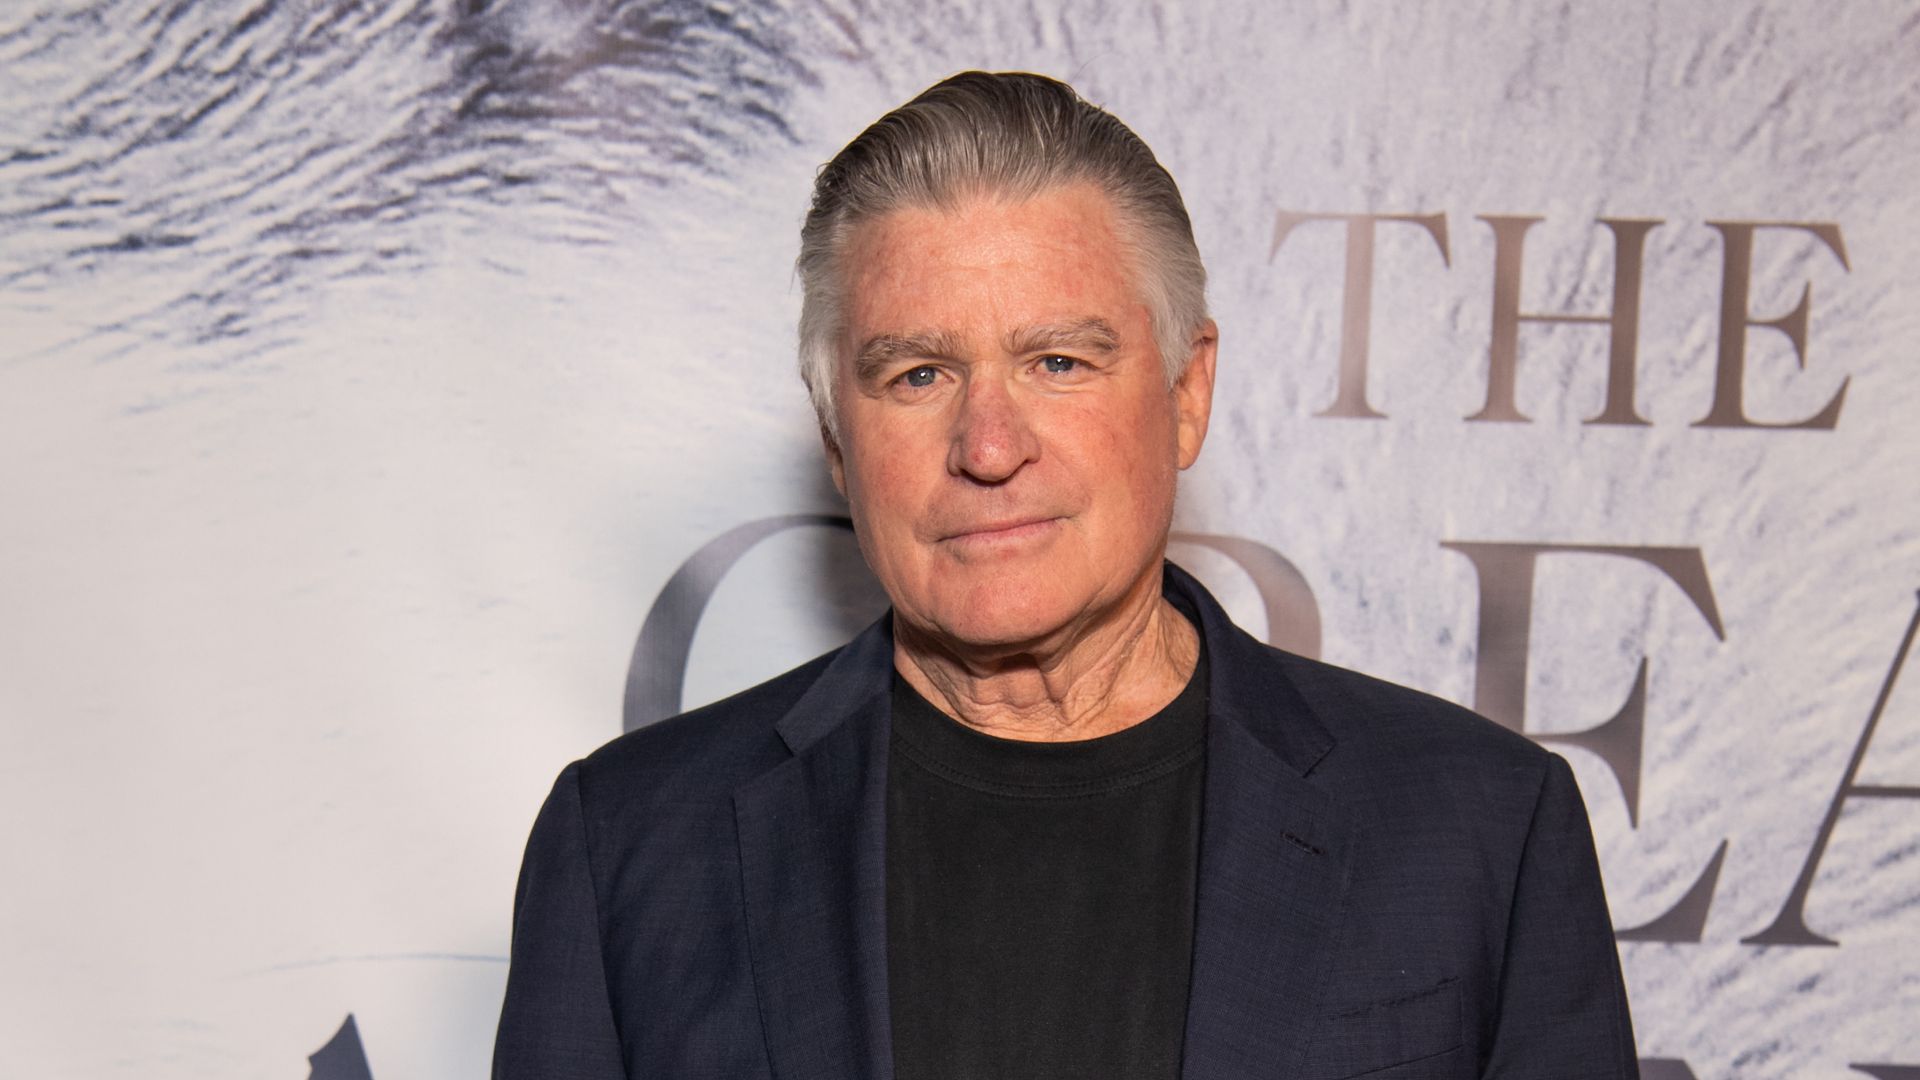 Treat Williams attends the premiere of P12 Films' 'The Great Alaskan Race' at ArcLight Hollywood on October 17, 2019 in Hollywood, California